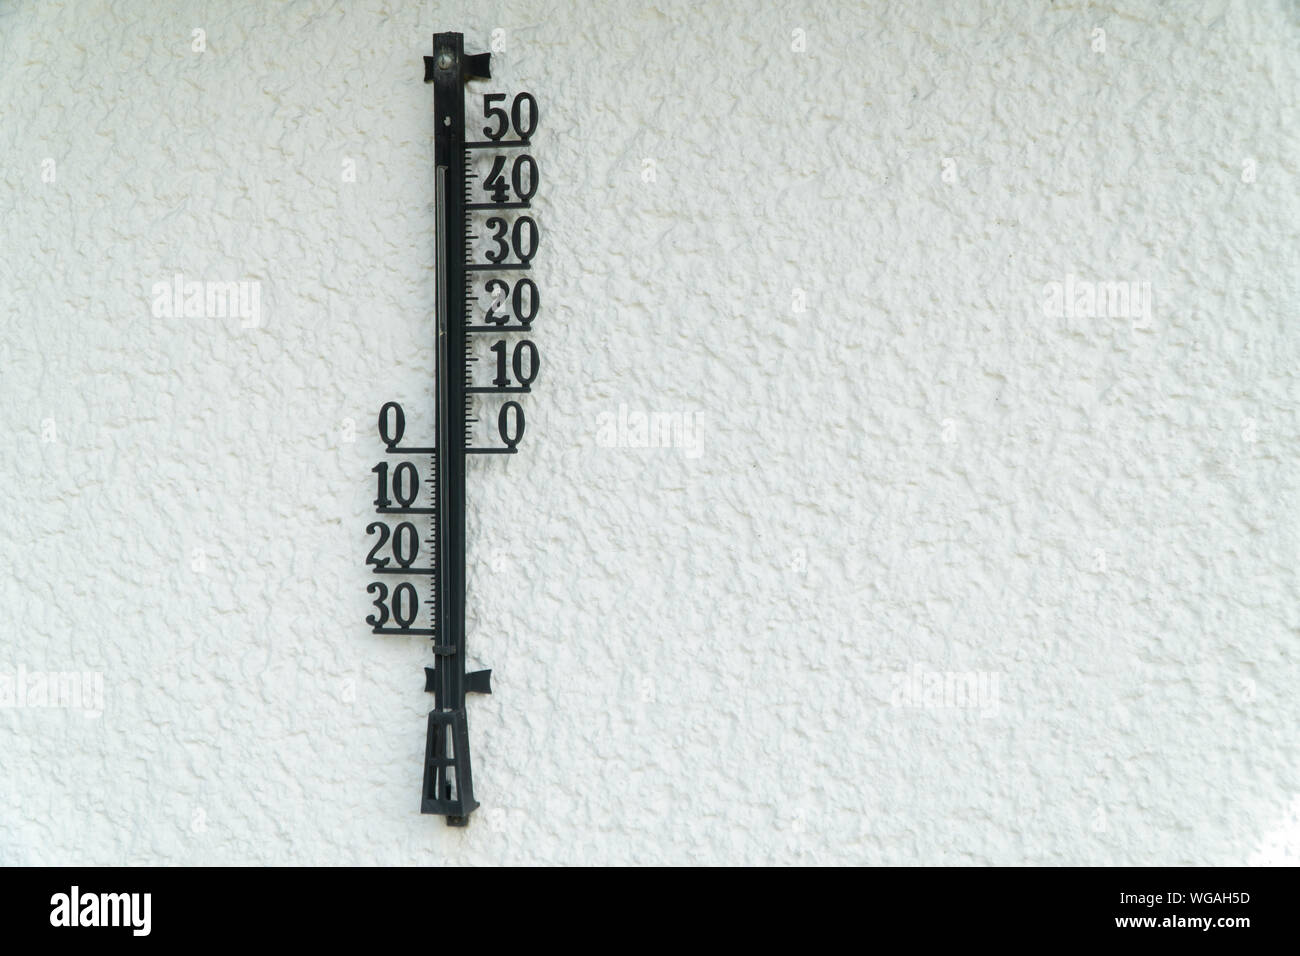 https://c8.alamy.com/comp/WGAH5D/vintage-street-thermometer-on-a-white-wall-sommer-WGAH5D.jpg